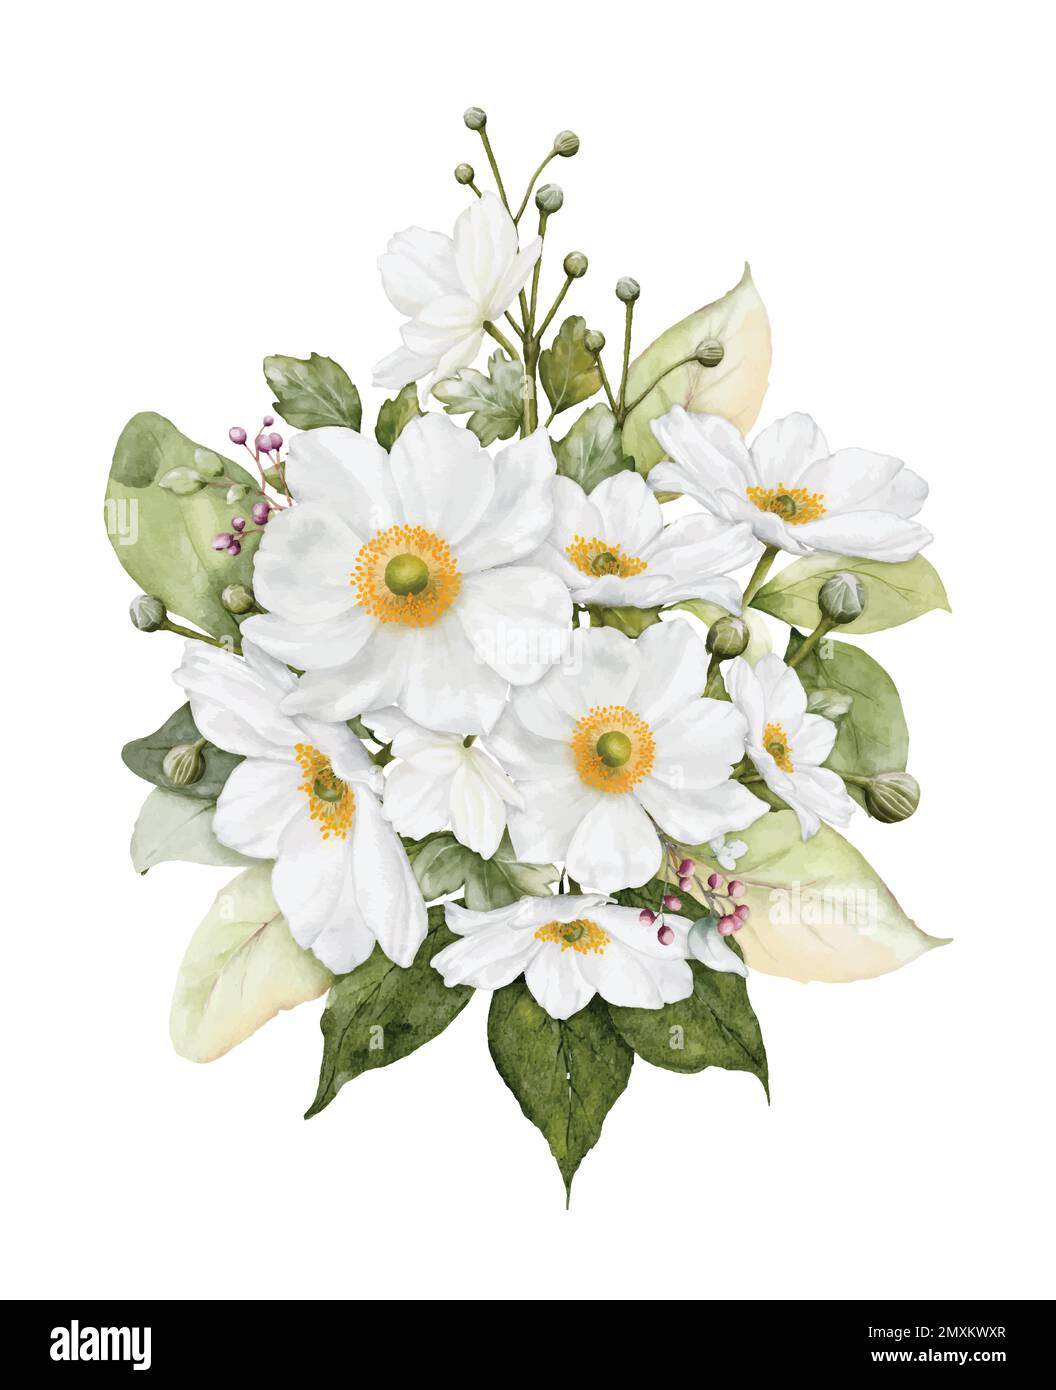 Watercolor arrangement with white flower blooming. Bouquet of anemones flowers and leaves suitable for wedding, Valentine's day, or greeting cards. Bo Stock Vector